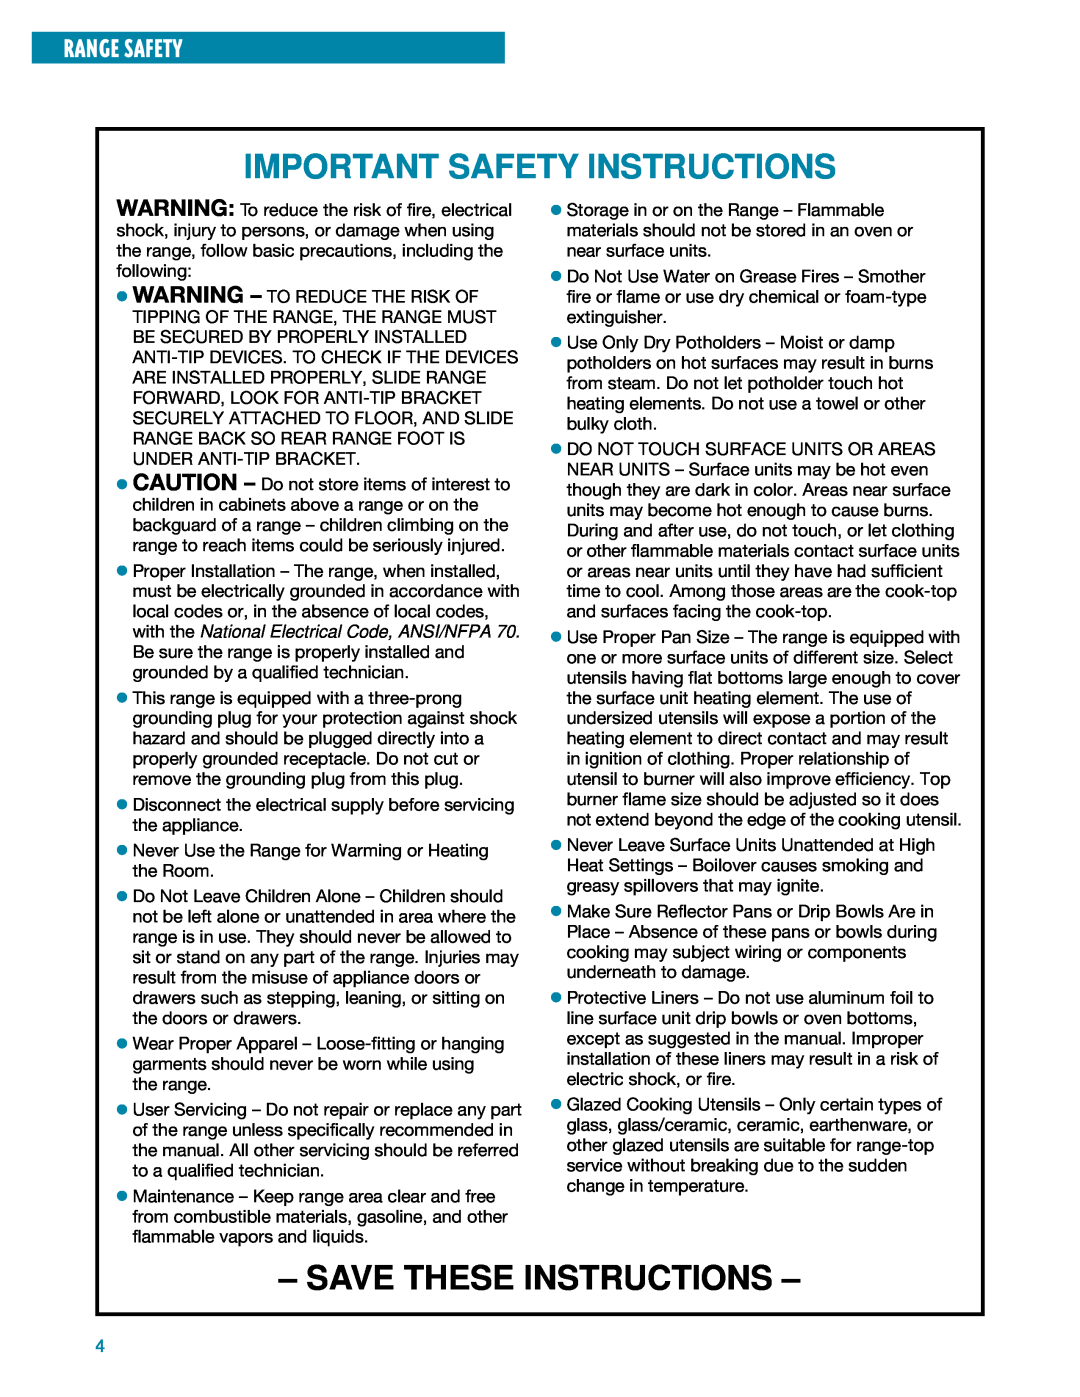 Whirlpool SF385PEE warranty Important Safety Instructions, Save These Instructions, Range Safety 